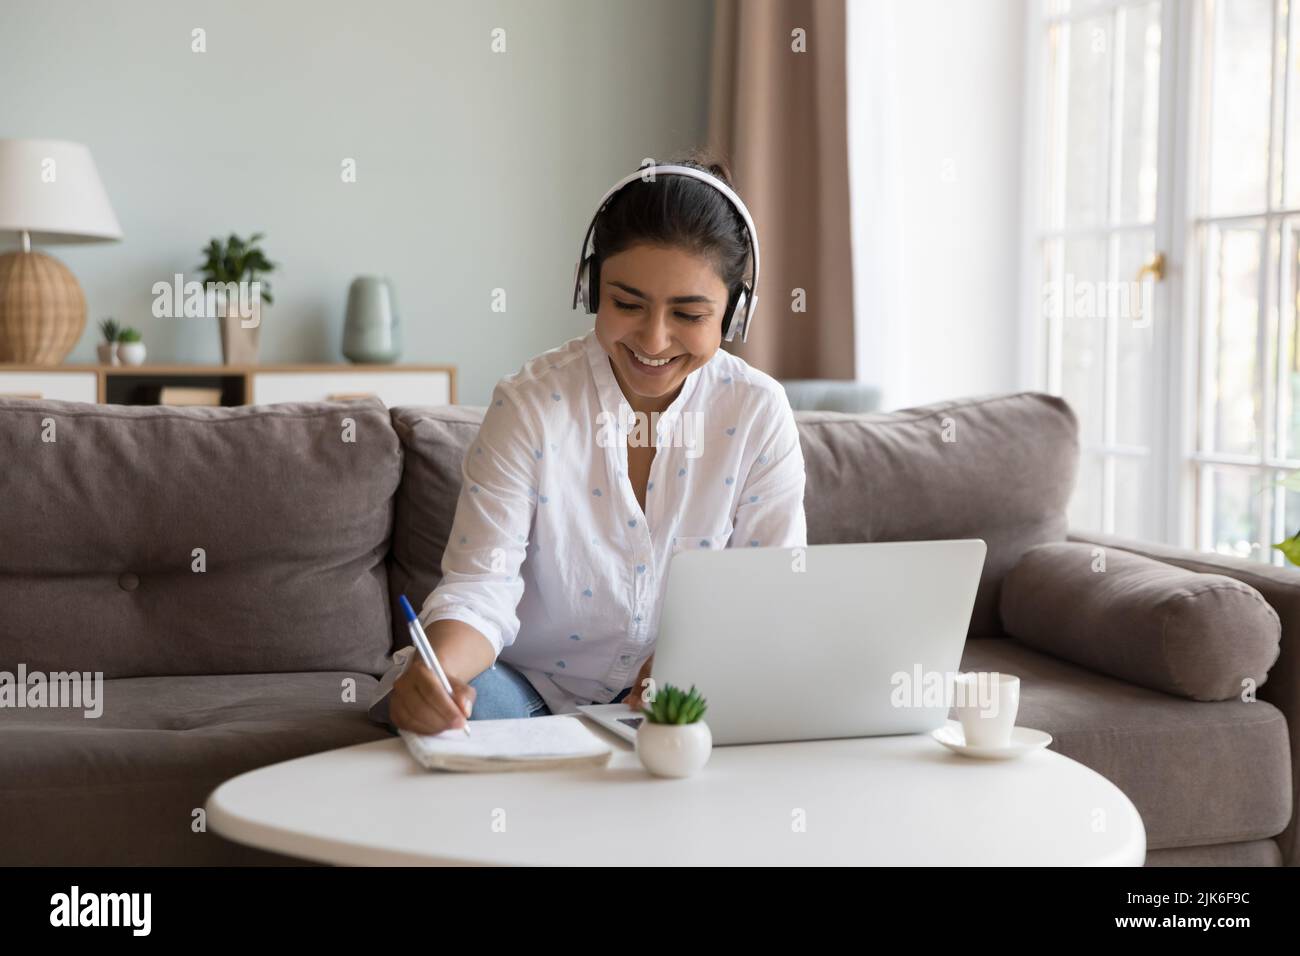 Happy millennial Indian student woman in wireless headphones writing notes Stock Photo